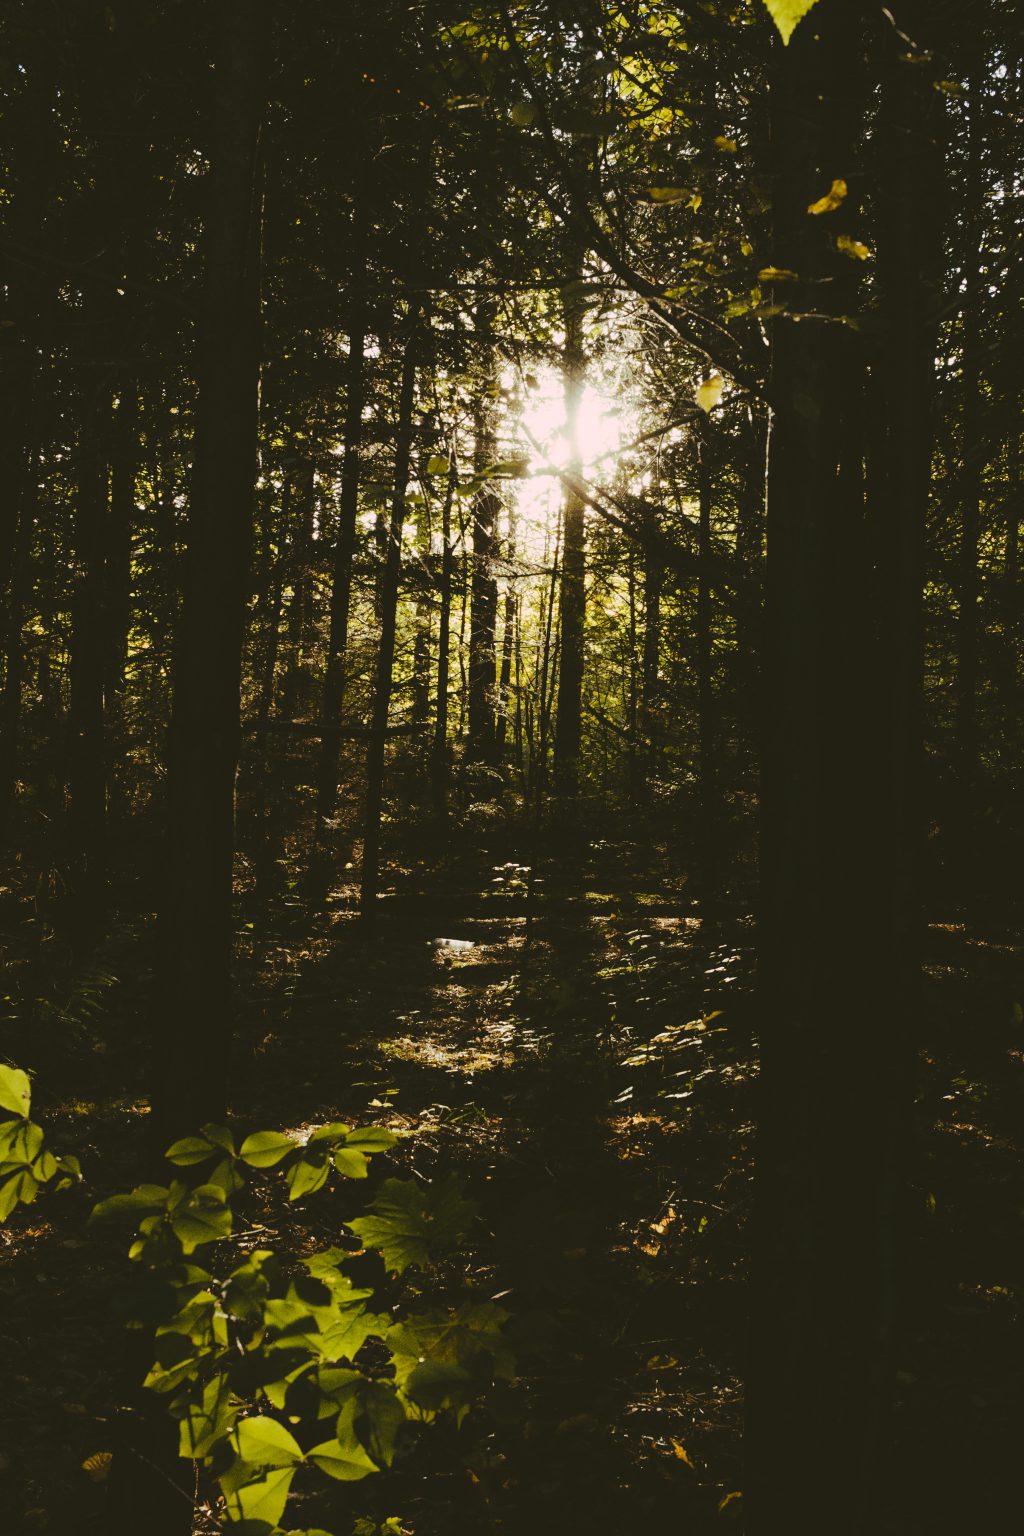 Sun shining through trees in the forest - free stock photo